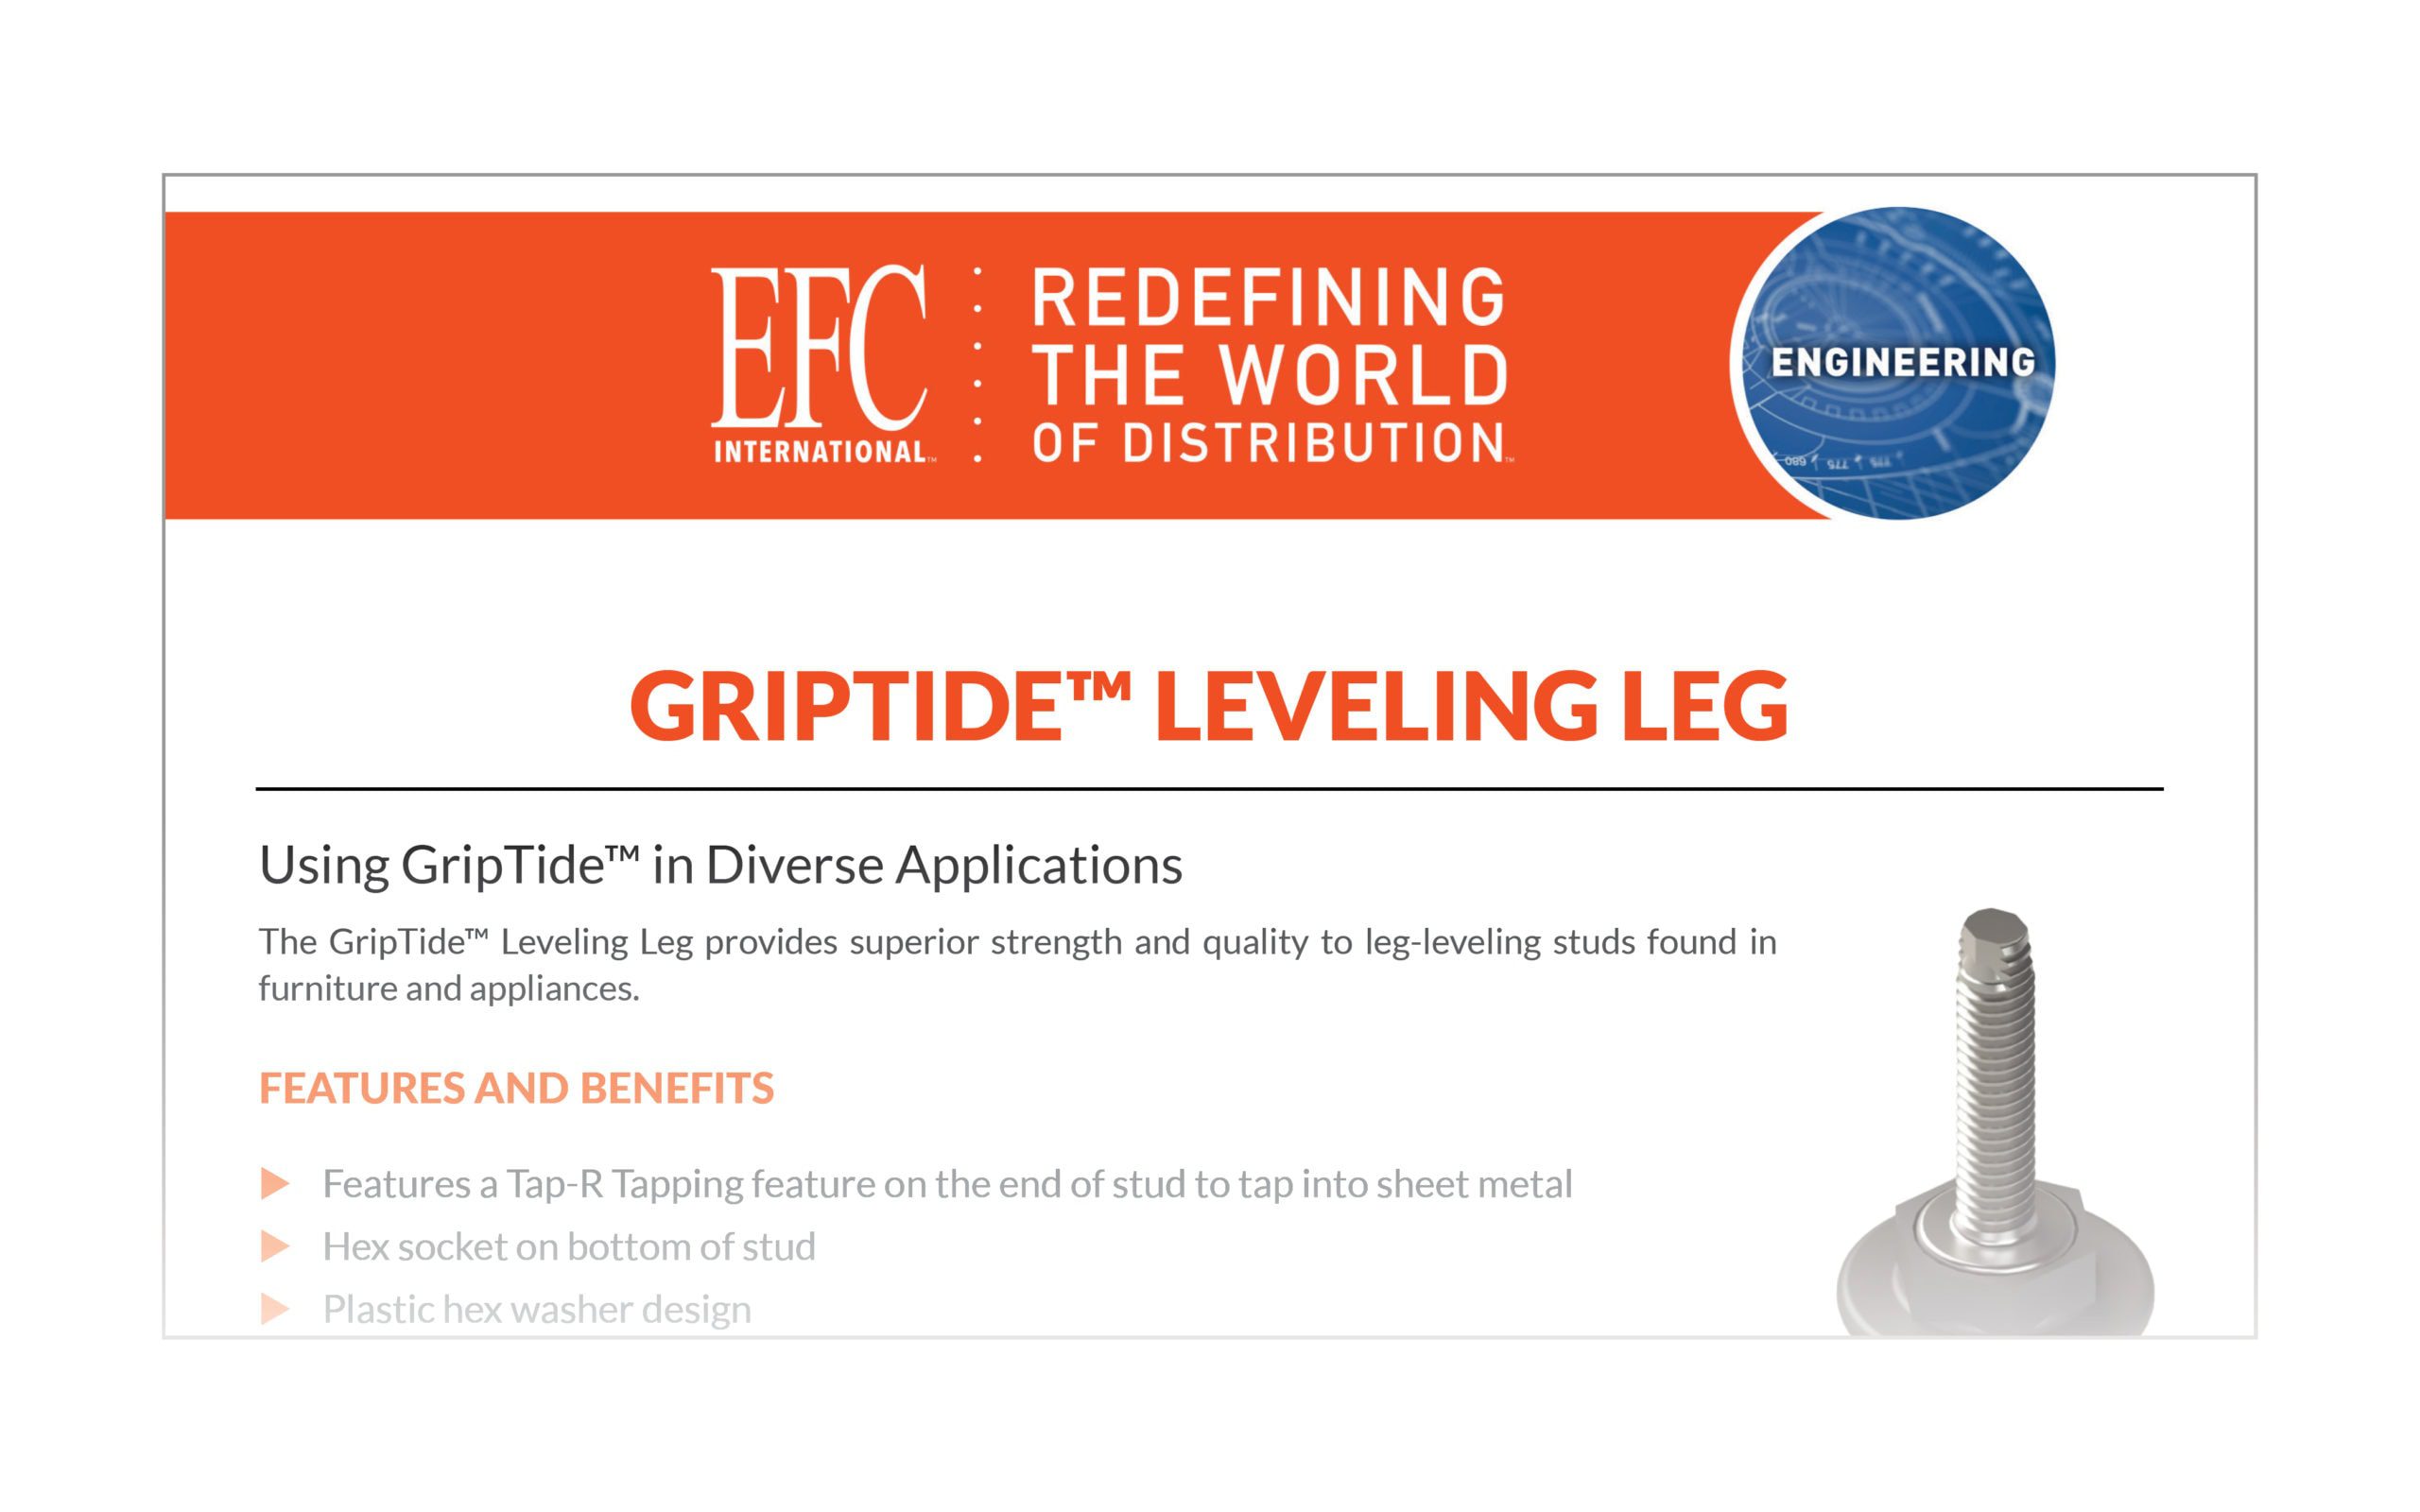 The GripTide™ Leveling Leg provides superior strength and quality to leg-leveling studs found in furniture and appliances.